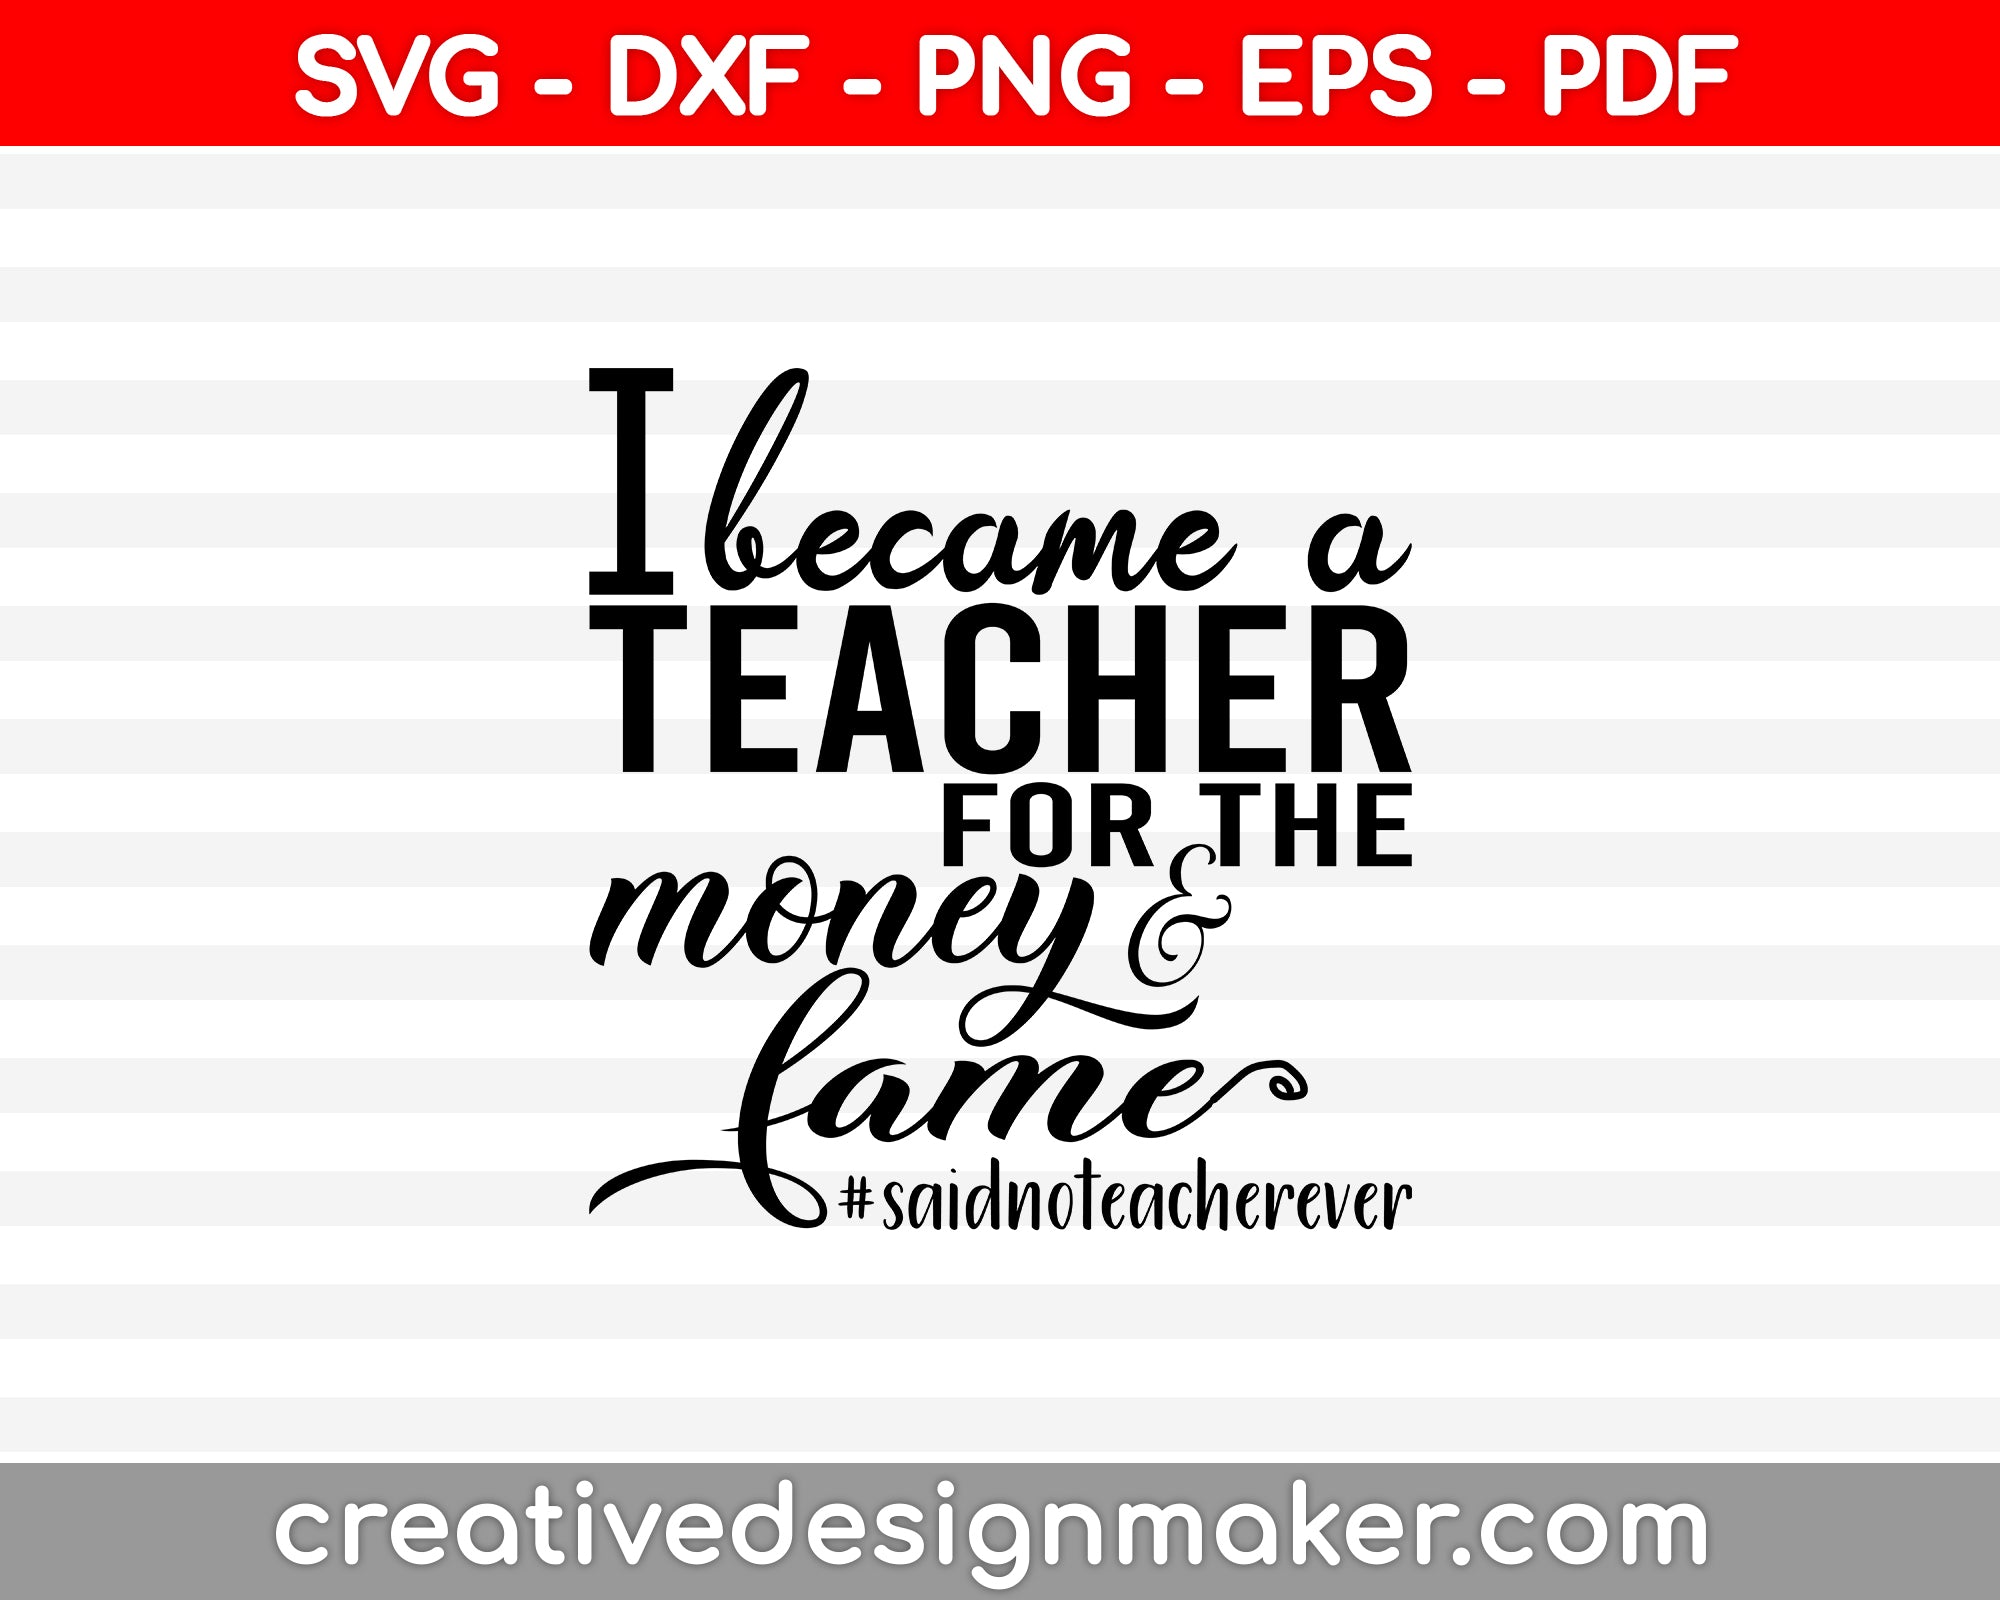 I Became A Teacher For The Money and Fame Svg Dxf Png Eps Pdf Printable Files